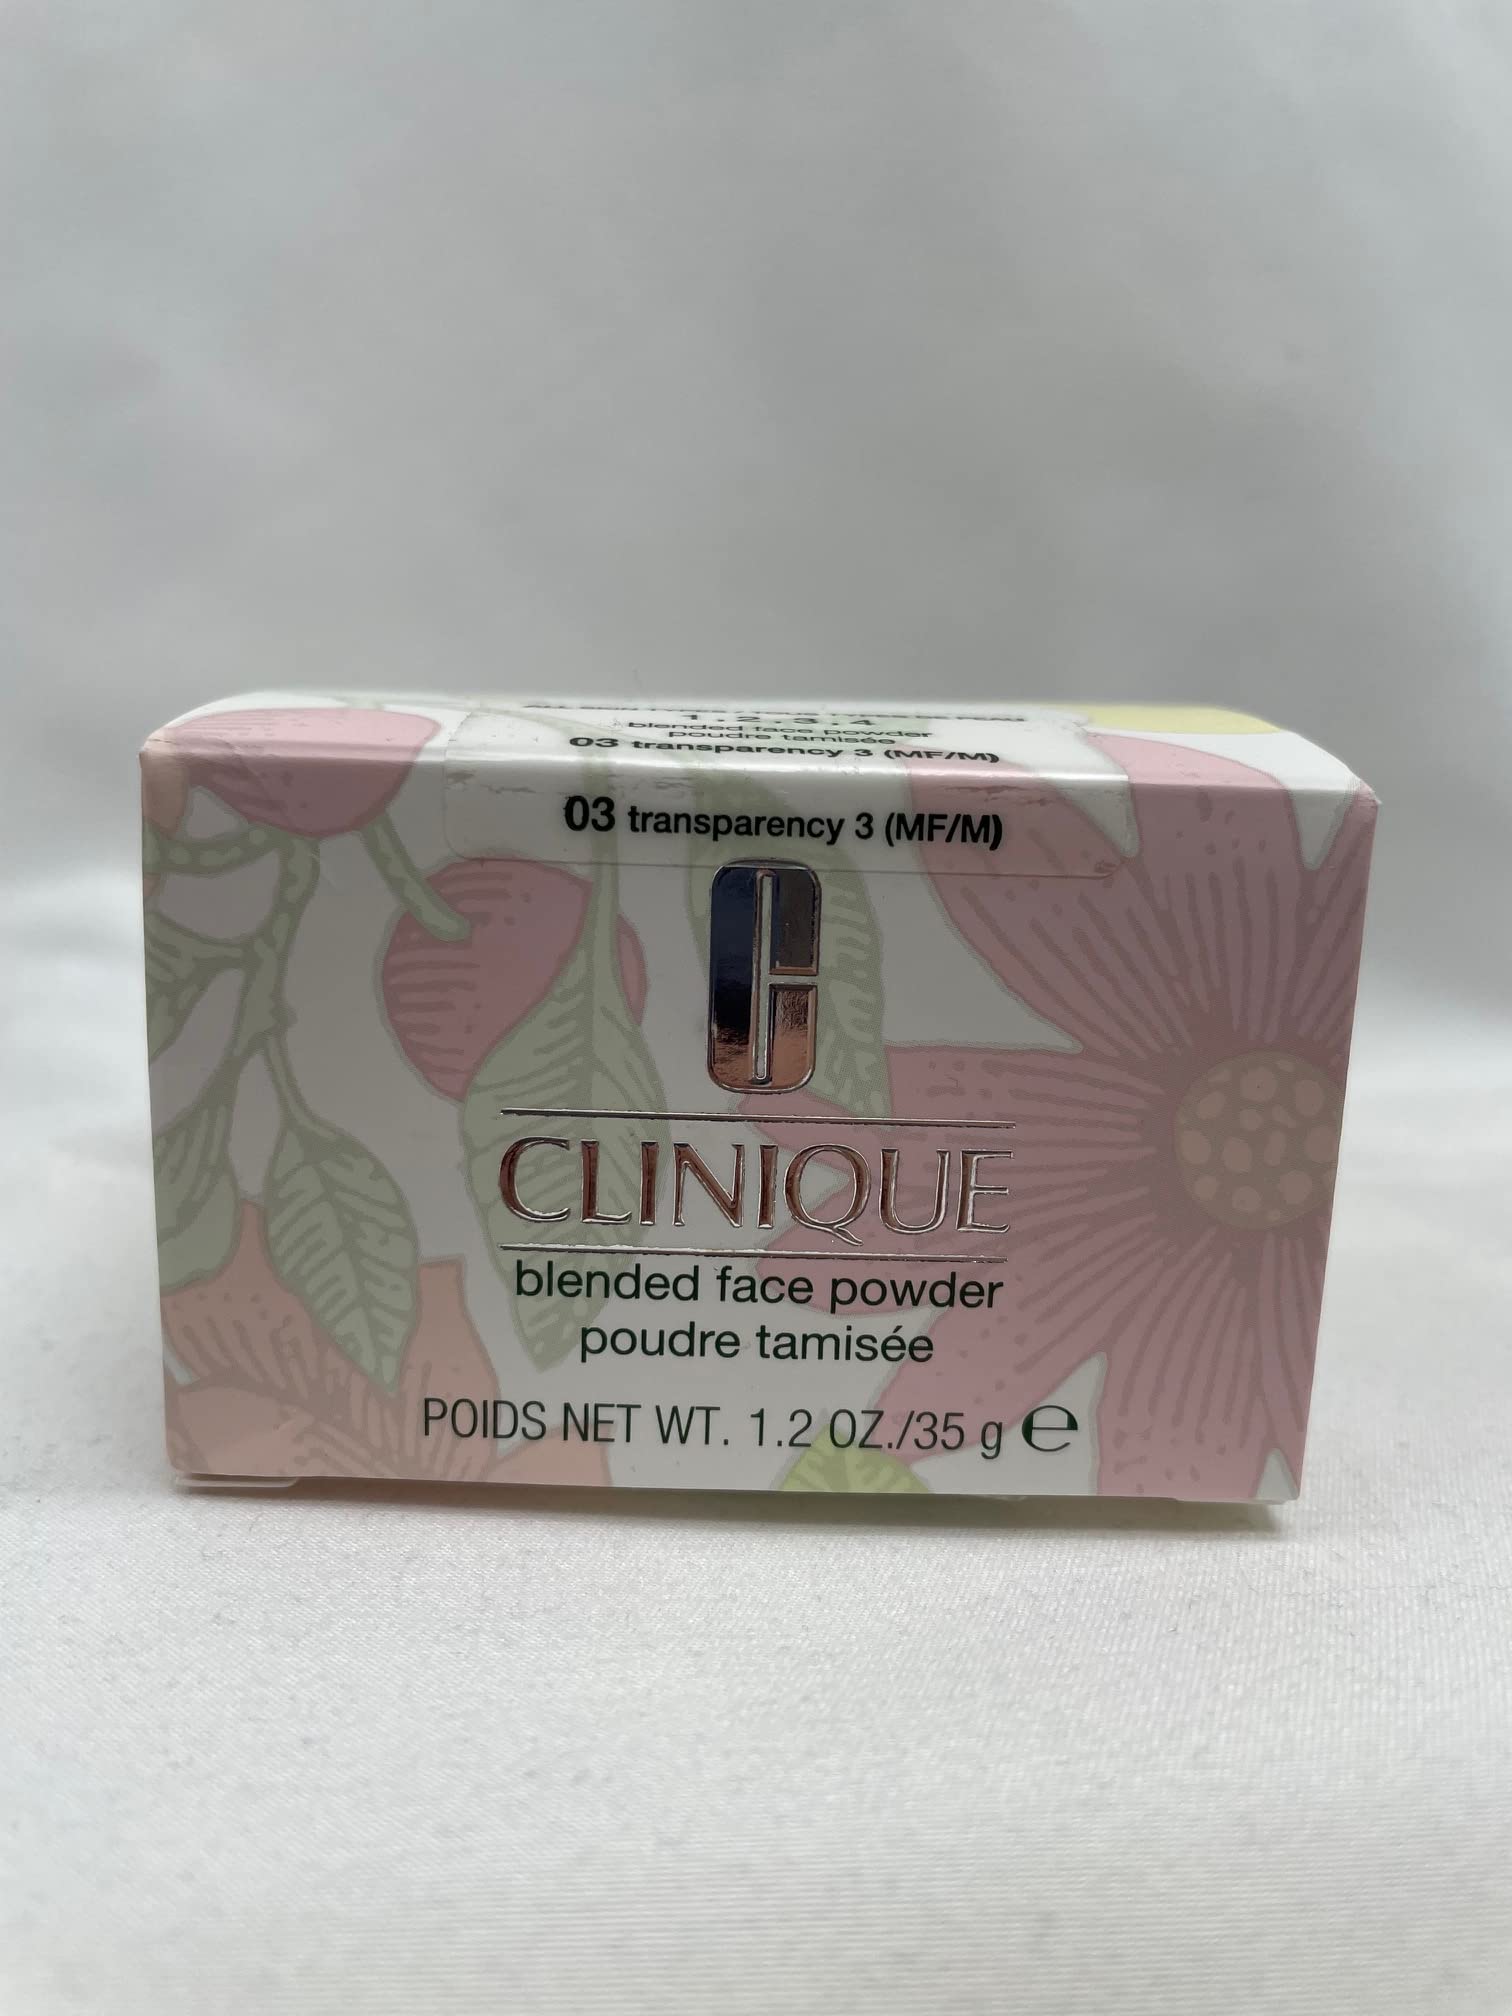 CLINIQUE TRANSPARENCY # 3 BLENDED FACE POWDER 1.2 Oz 35 G NO BRUSH